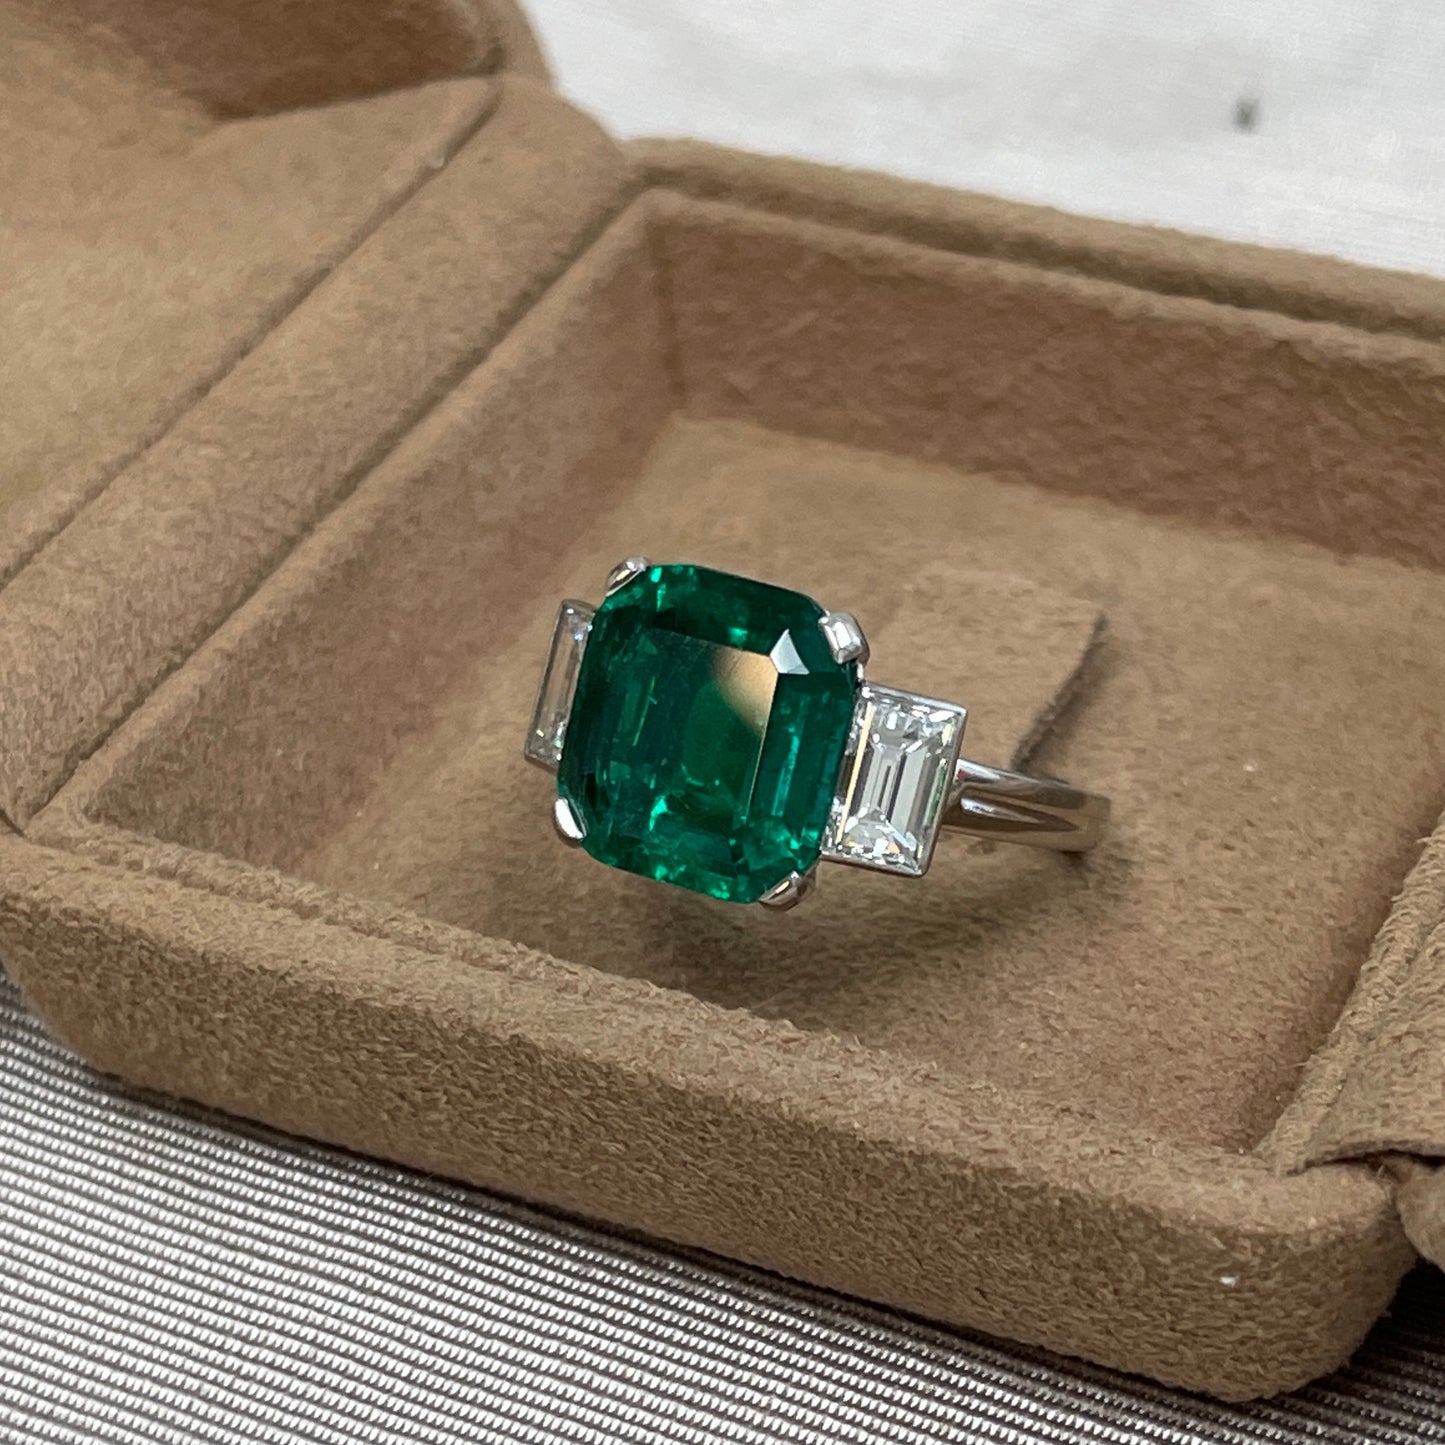 Post-1980s Platinum Colombian Emerald & Diamond Ring front view in jewelry box